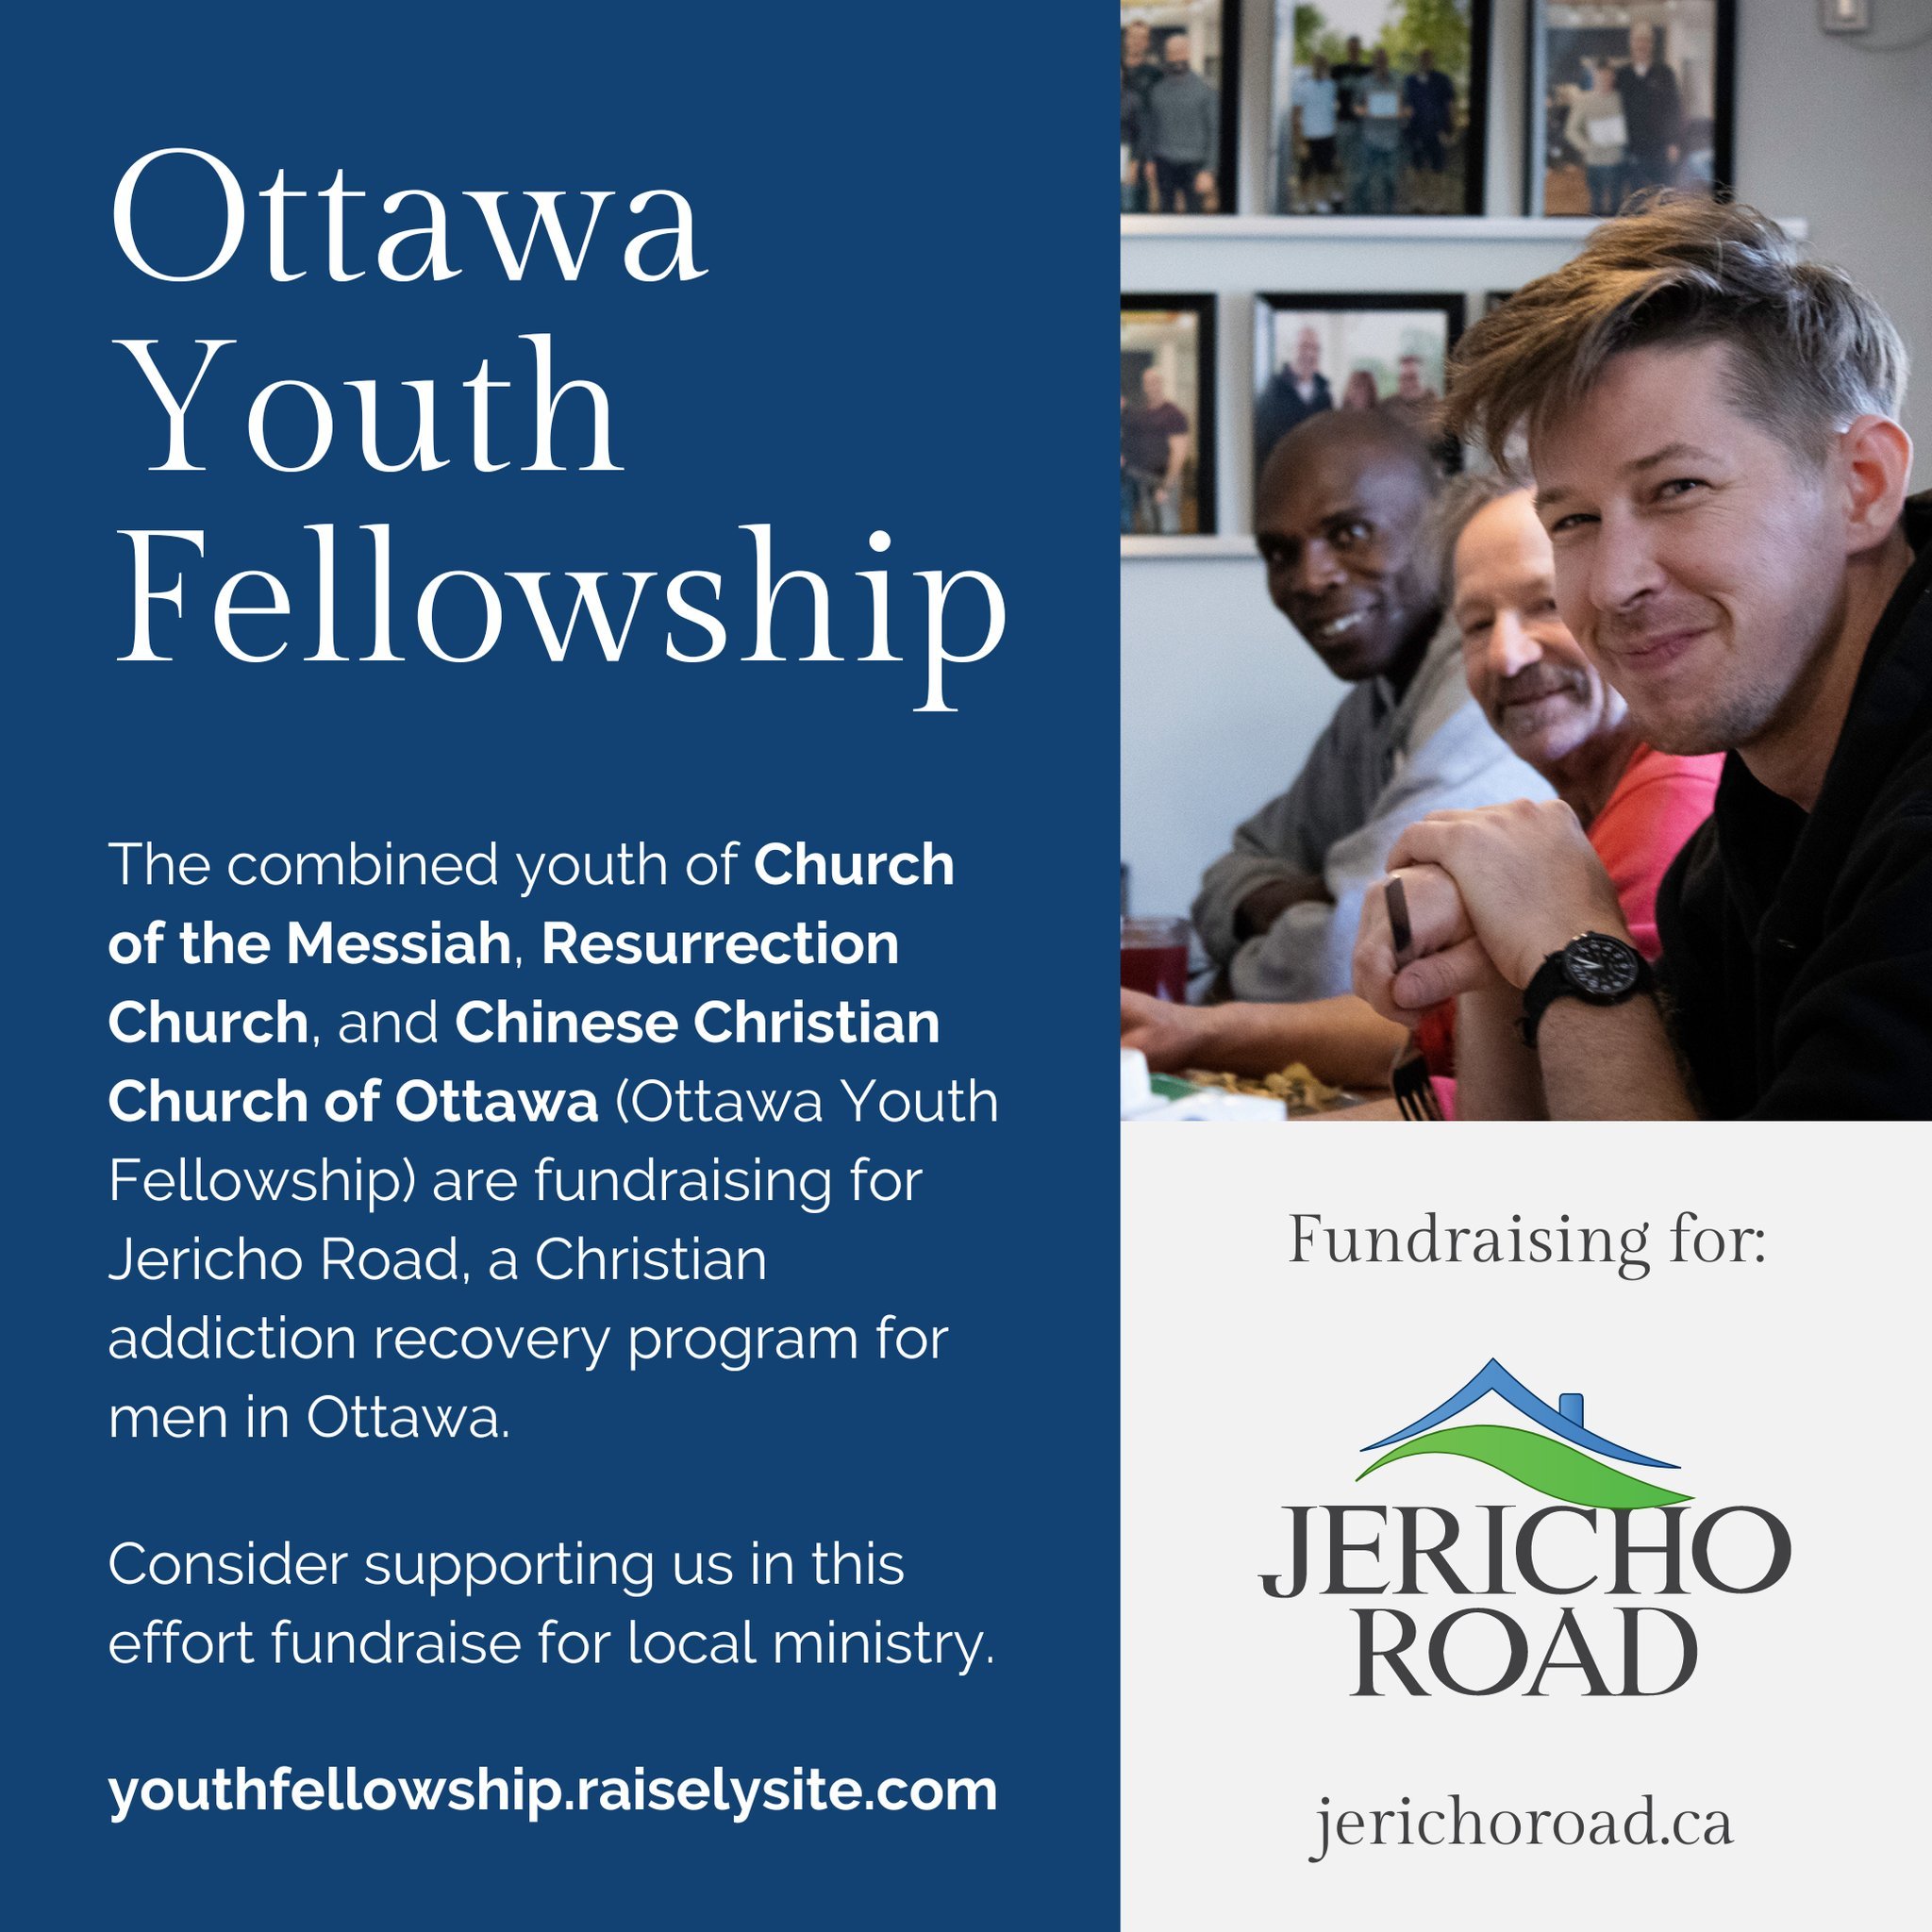 Our Youth Group is fundraising for @jerichoroadottawa, a Christian addiction and rehabilitation centre in our city helping give men a chance at long-term recovery.

Want to help? Consider supporting their effort here 👇
https://youthfellowship.raisel